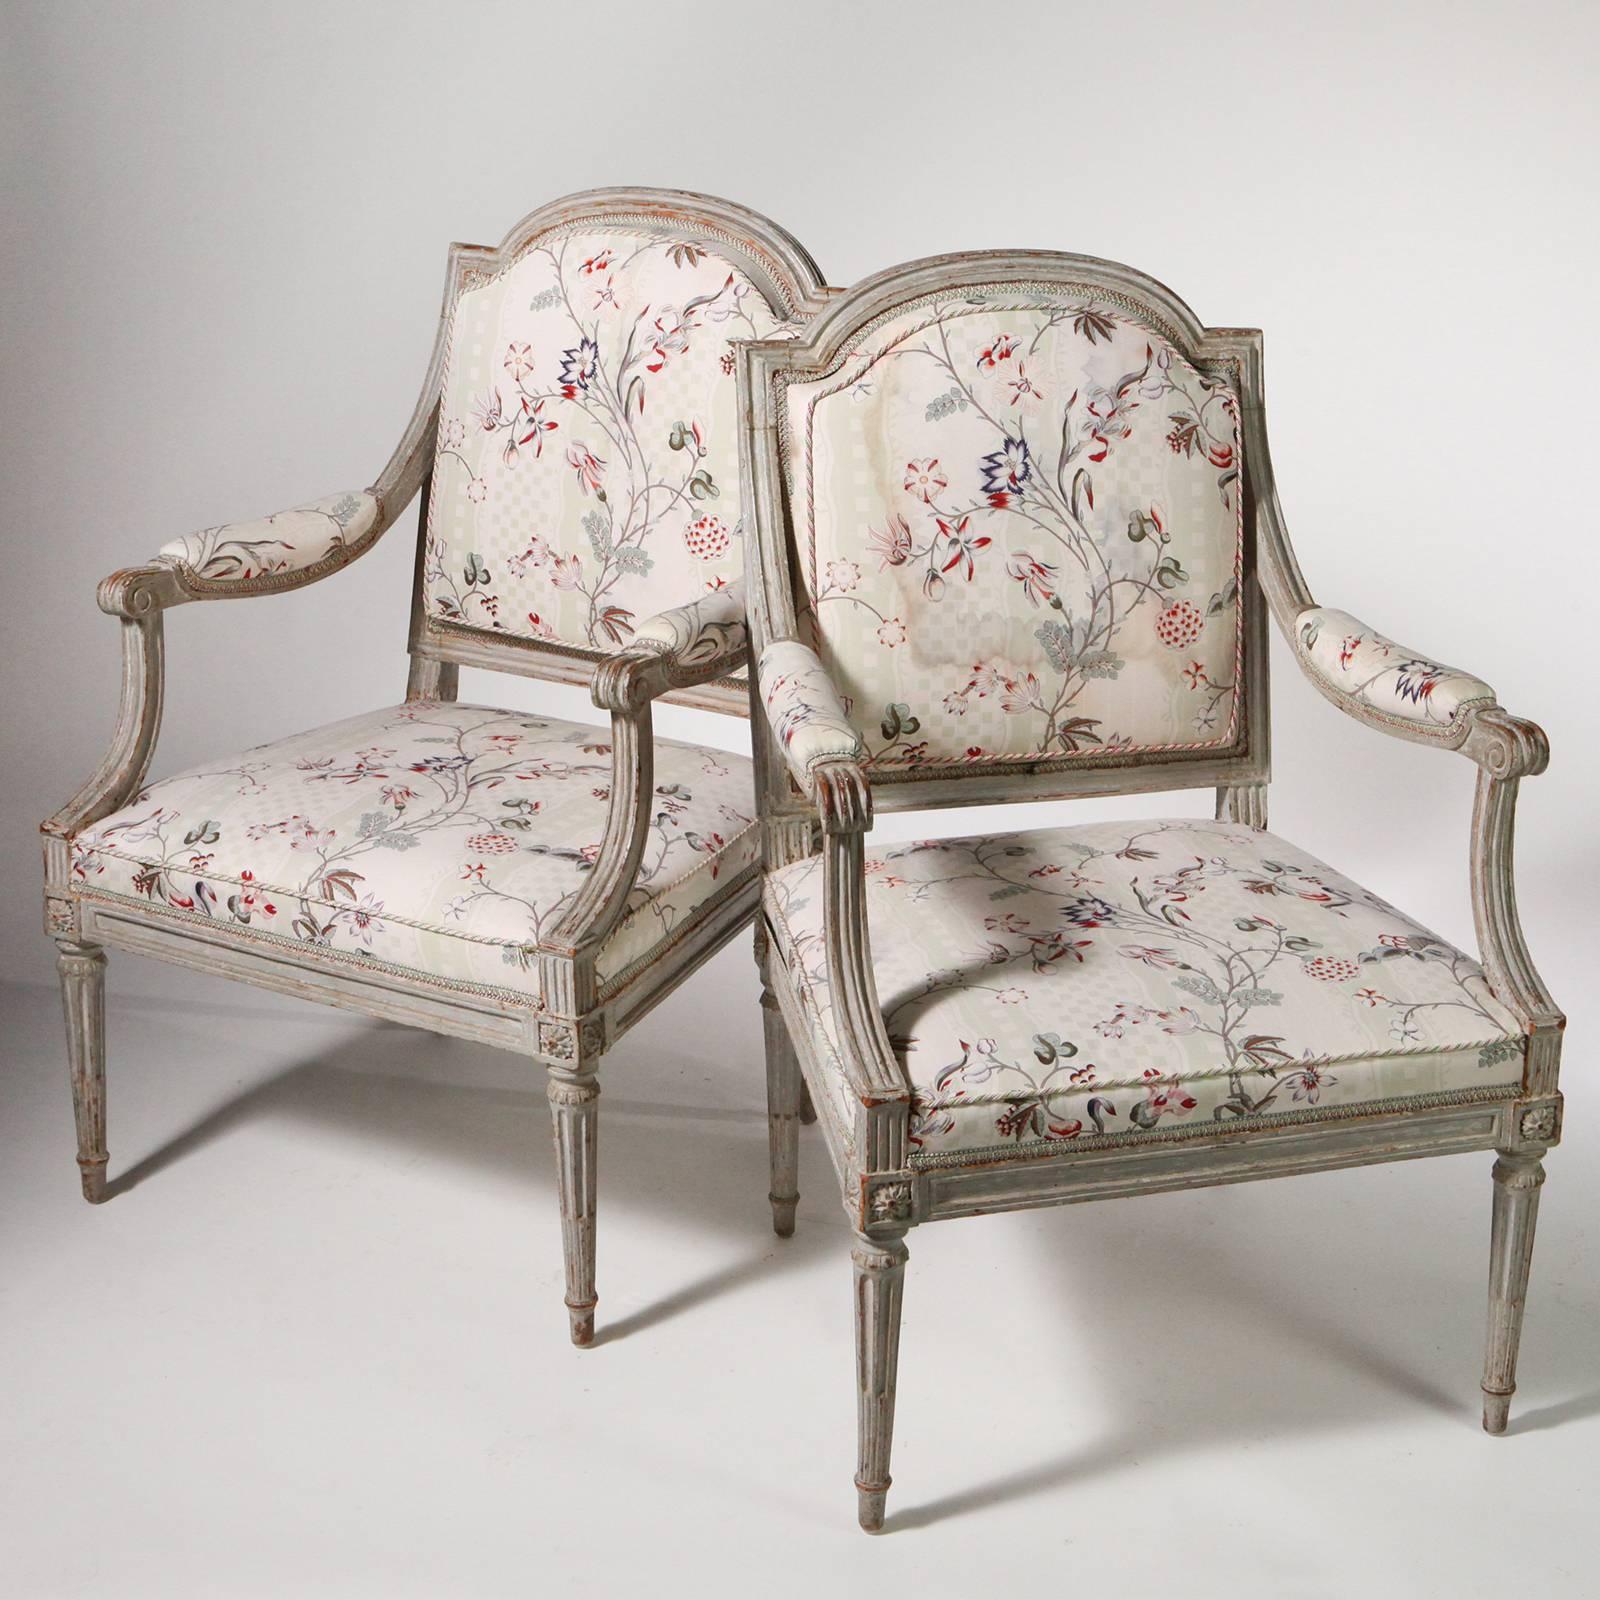 Pair of French 18th century fauteuil chairs. Painted gray wood frames with gracefully shaped backs, square seats, upholstered arms and reed legs. Upholstered in an elegant light floral fabric on cream background. Comes with separate plump seat